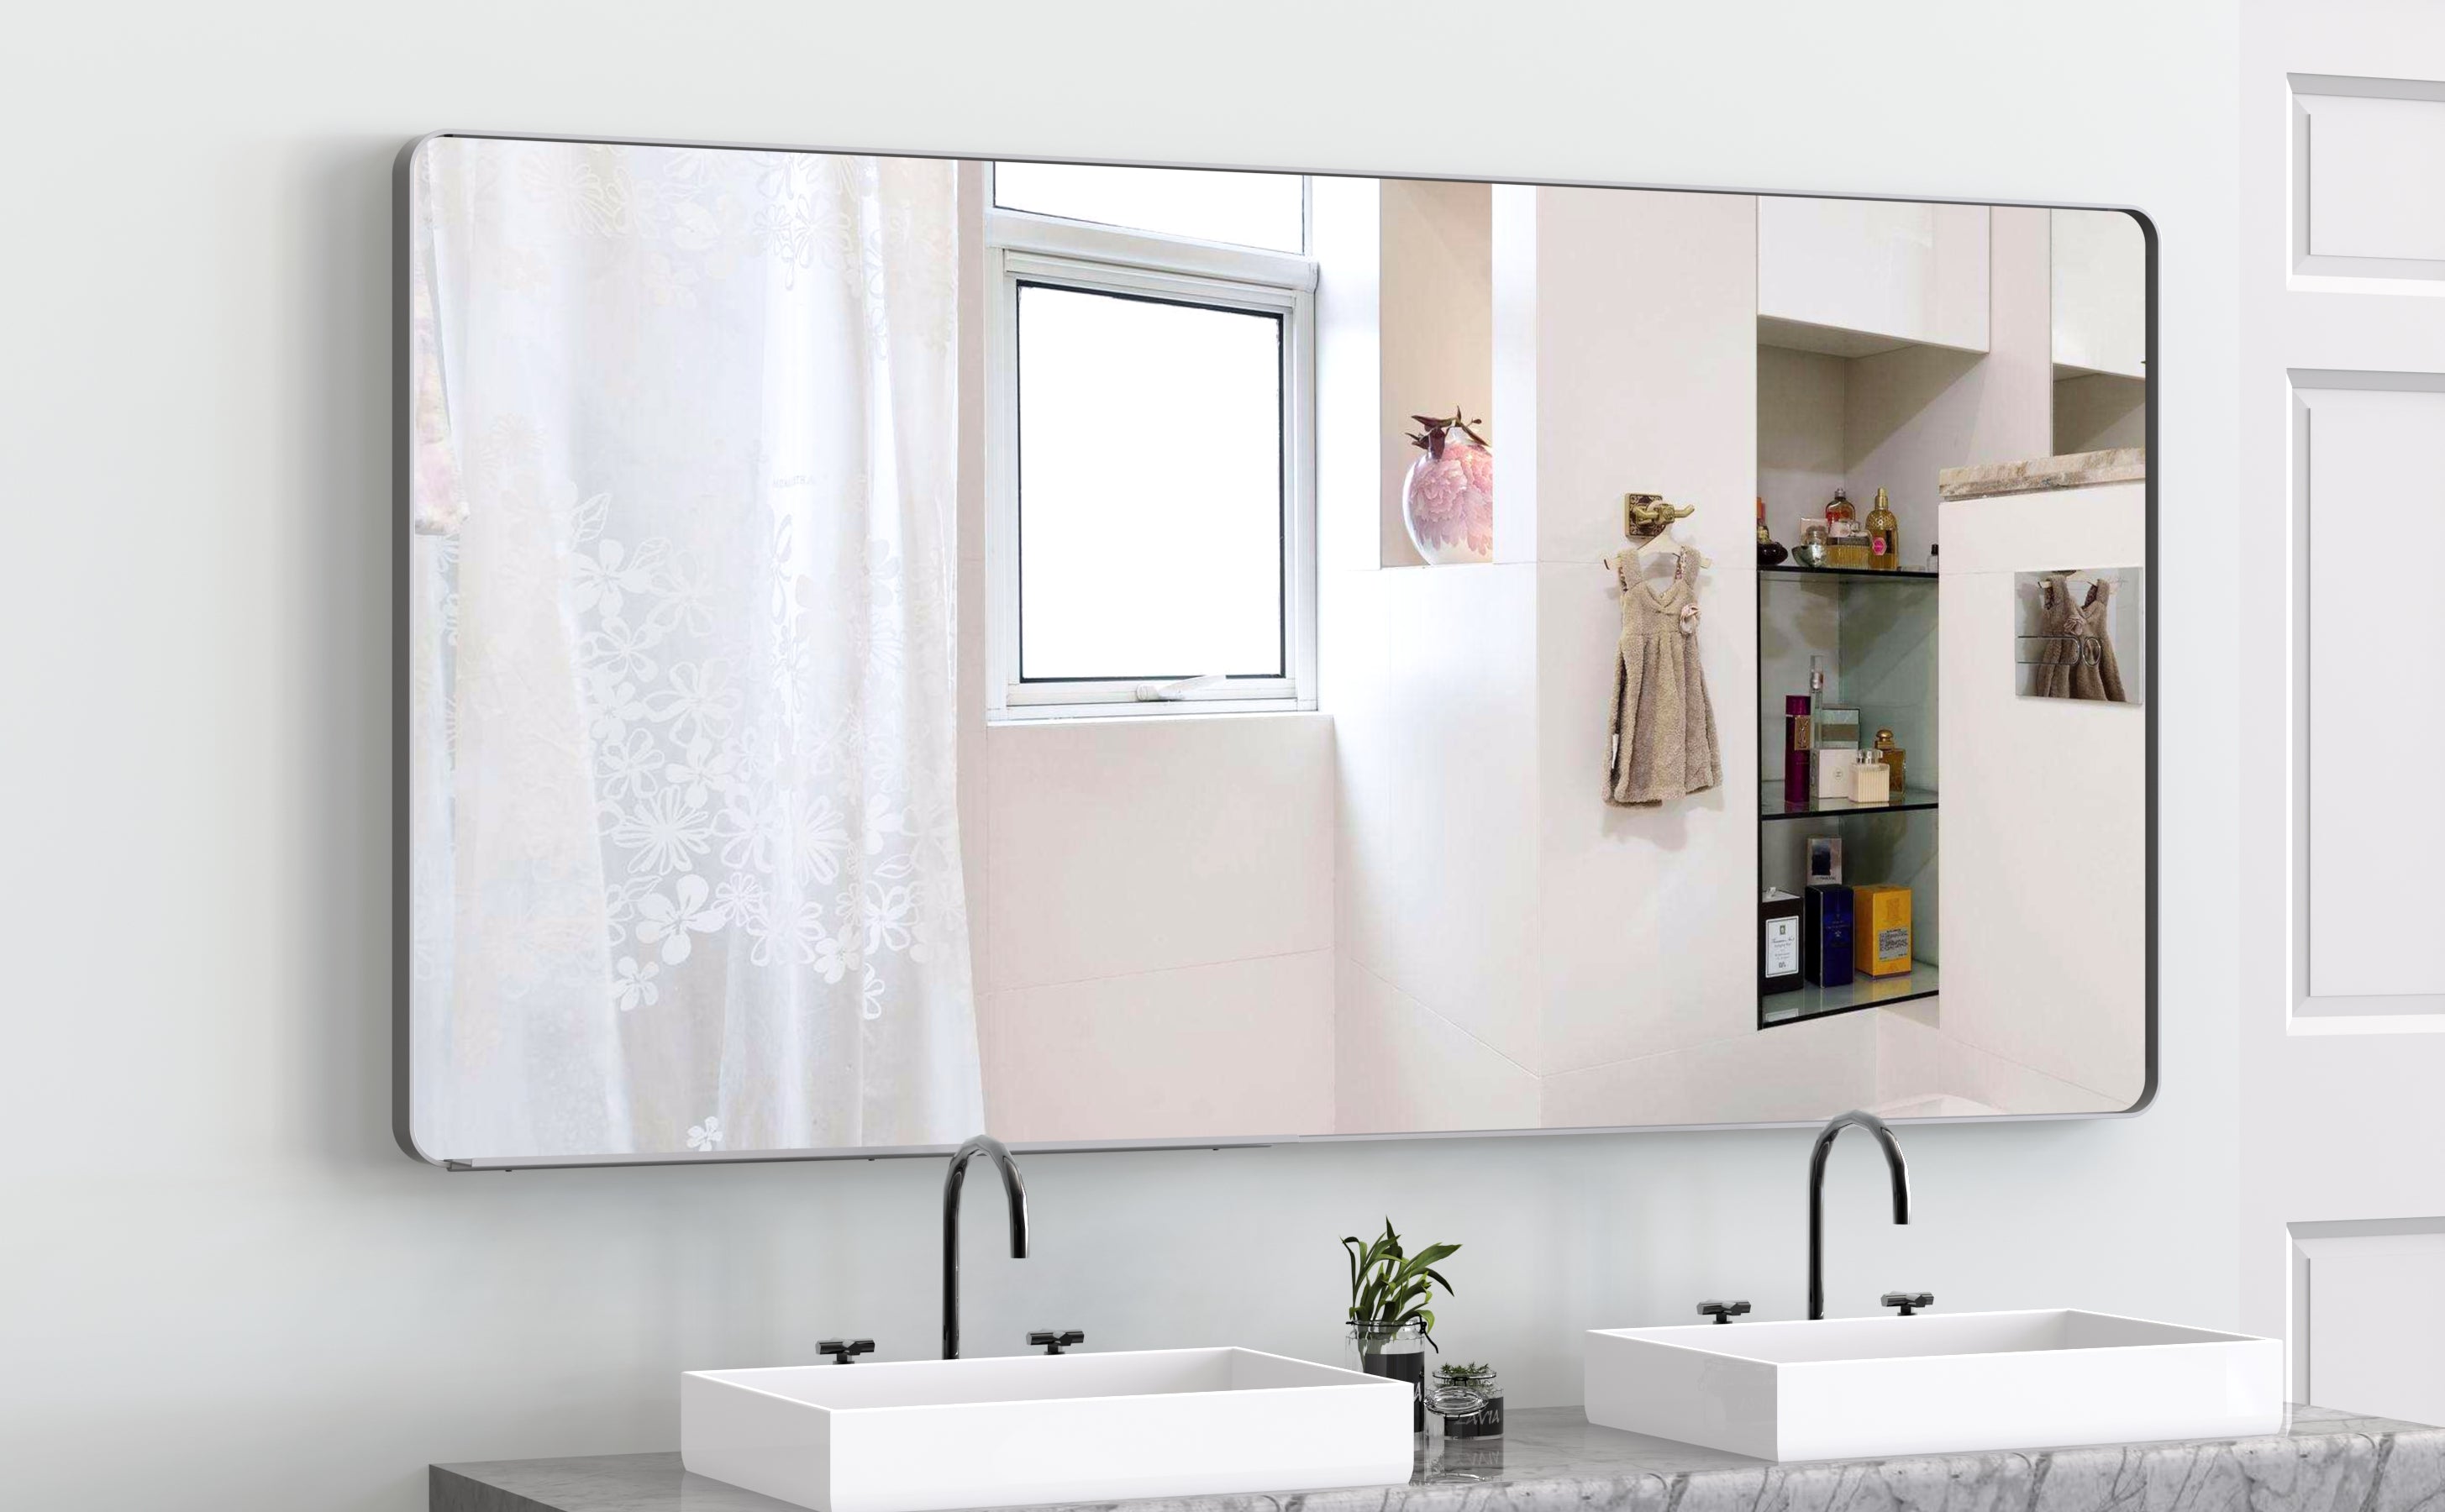 Oversized Bathroom Mirror with Mobile Tray Wall Mount Mirror,Vertical Horizontal Hanging Aluminum Framed Wall Mirror Full Length Mirror,Full Body Mirror for Bedroom Living Room,Silver,72 x 36 Inches